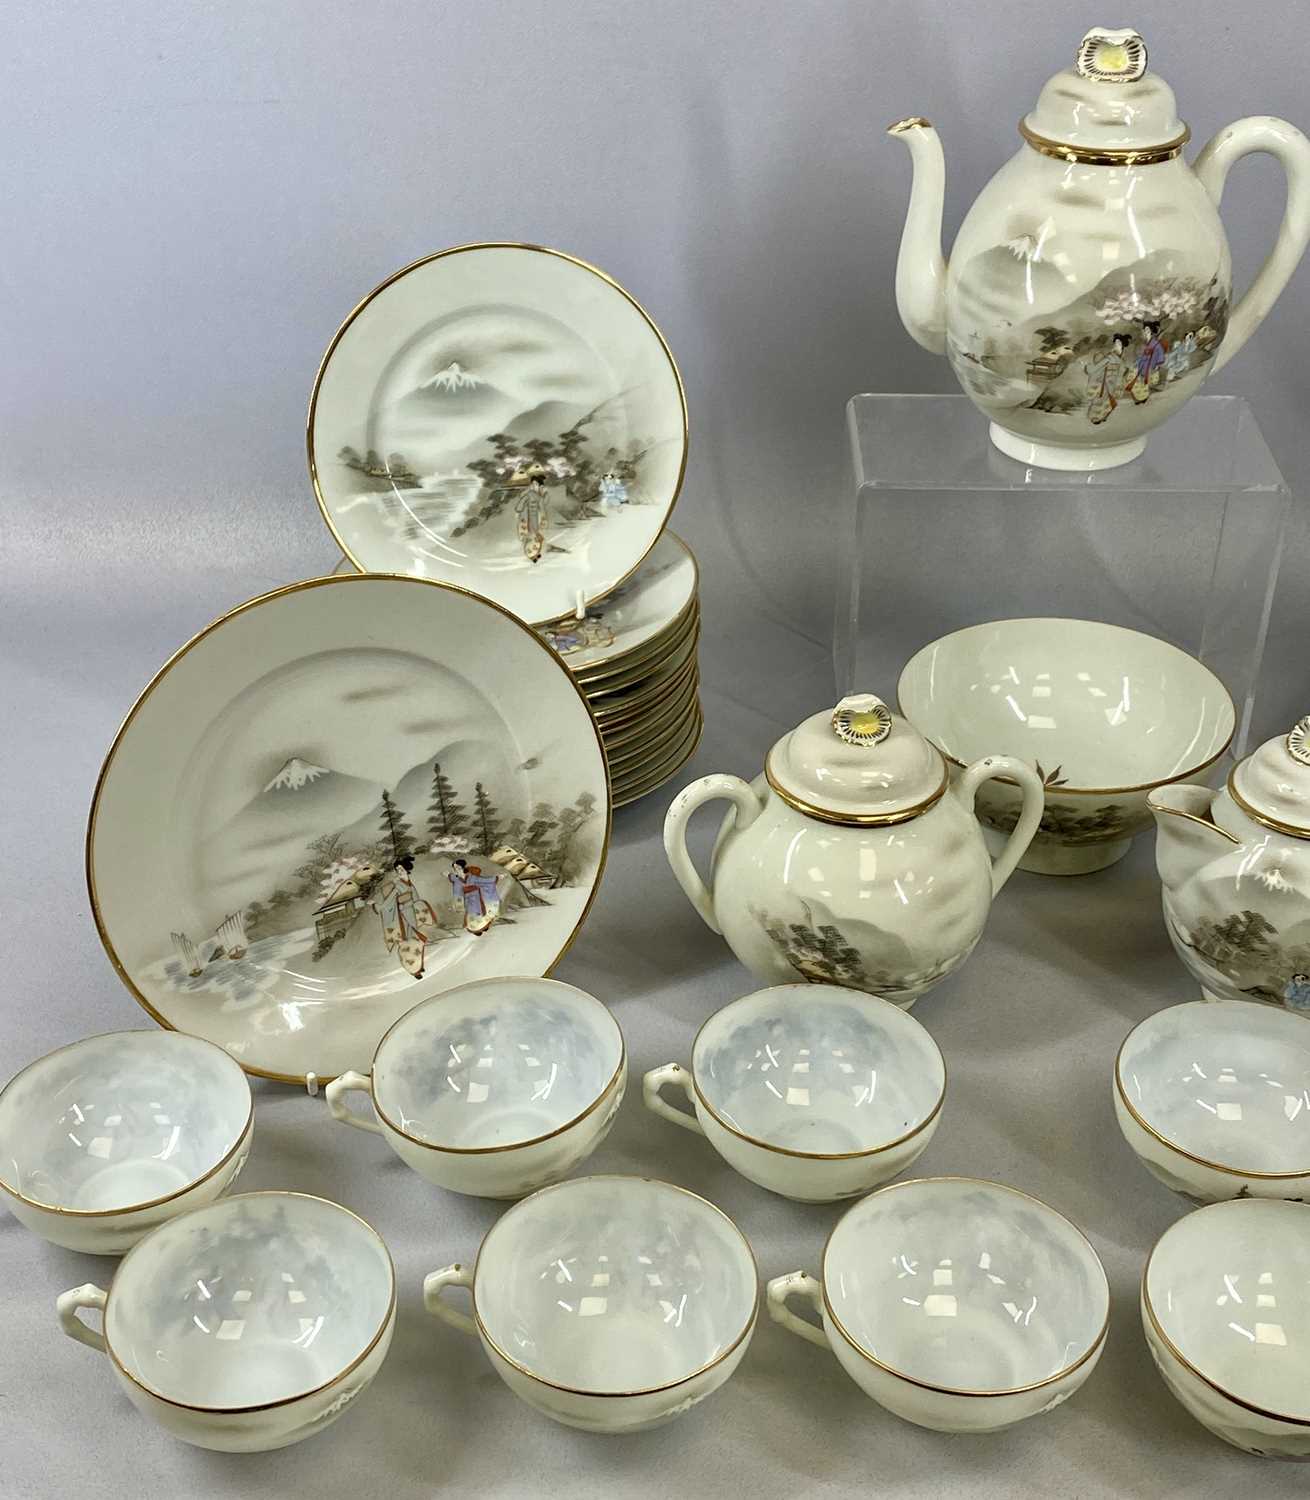 TWO CHINA TEA SERVICES, Royal Albert 'Celebration' pattern, six cups, six saucers, six side plates - Image 4 of 5